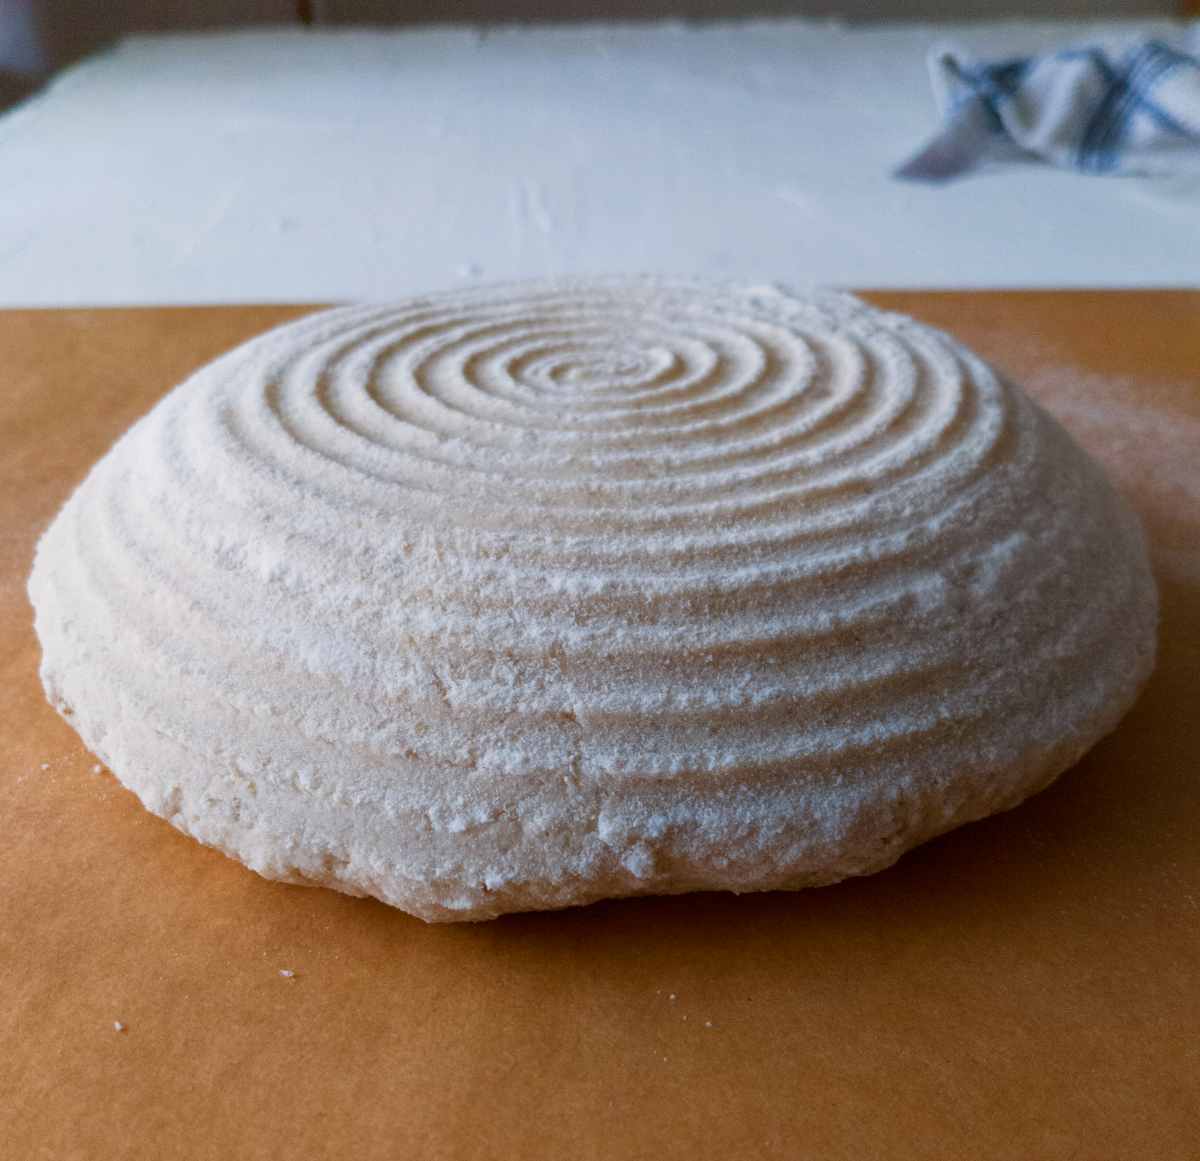 The proofed dough out of the freezer before shaping on the parchment paper.